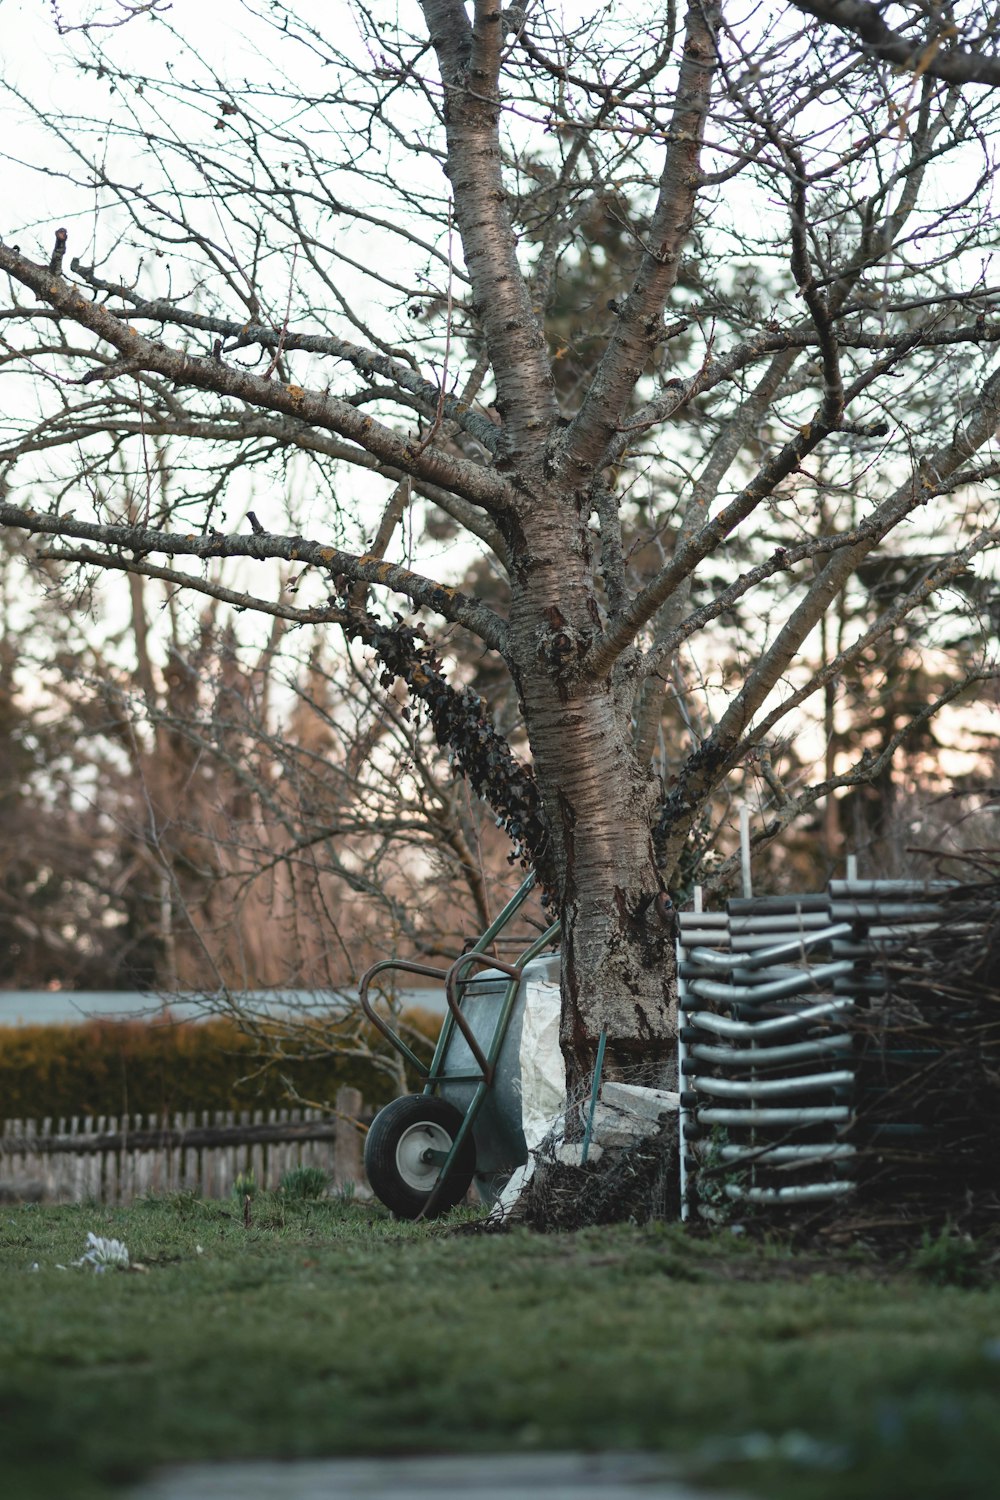 a lawn mower sitting next to a tree in a yard